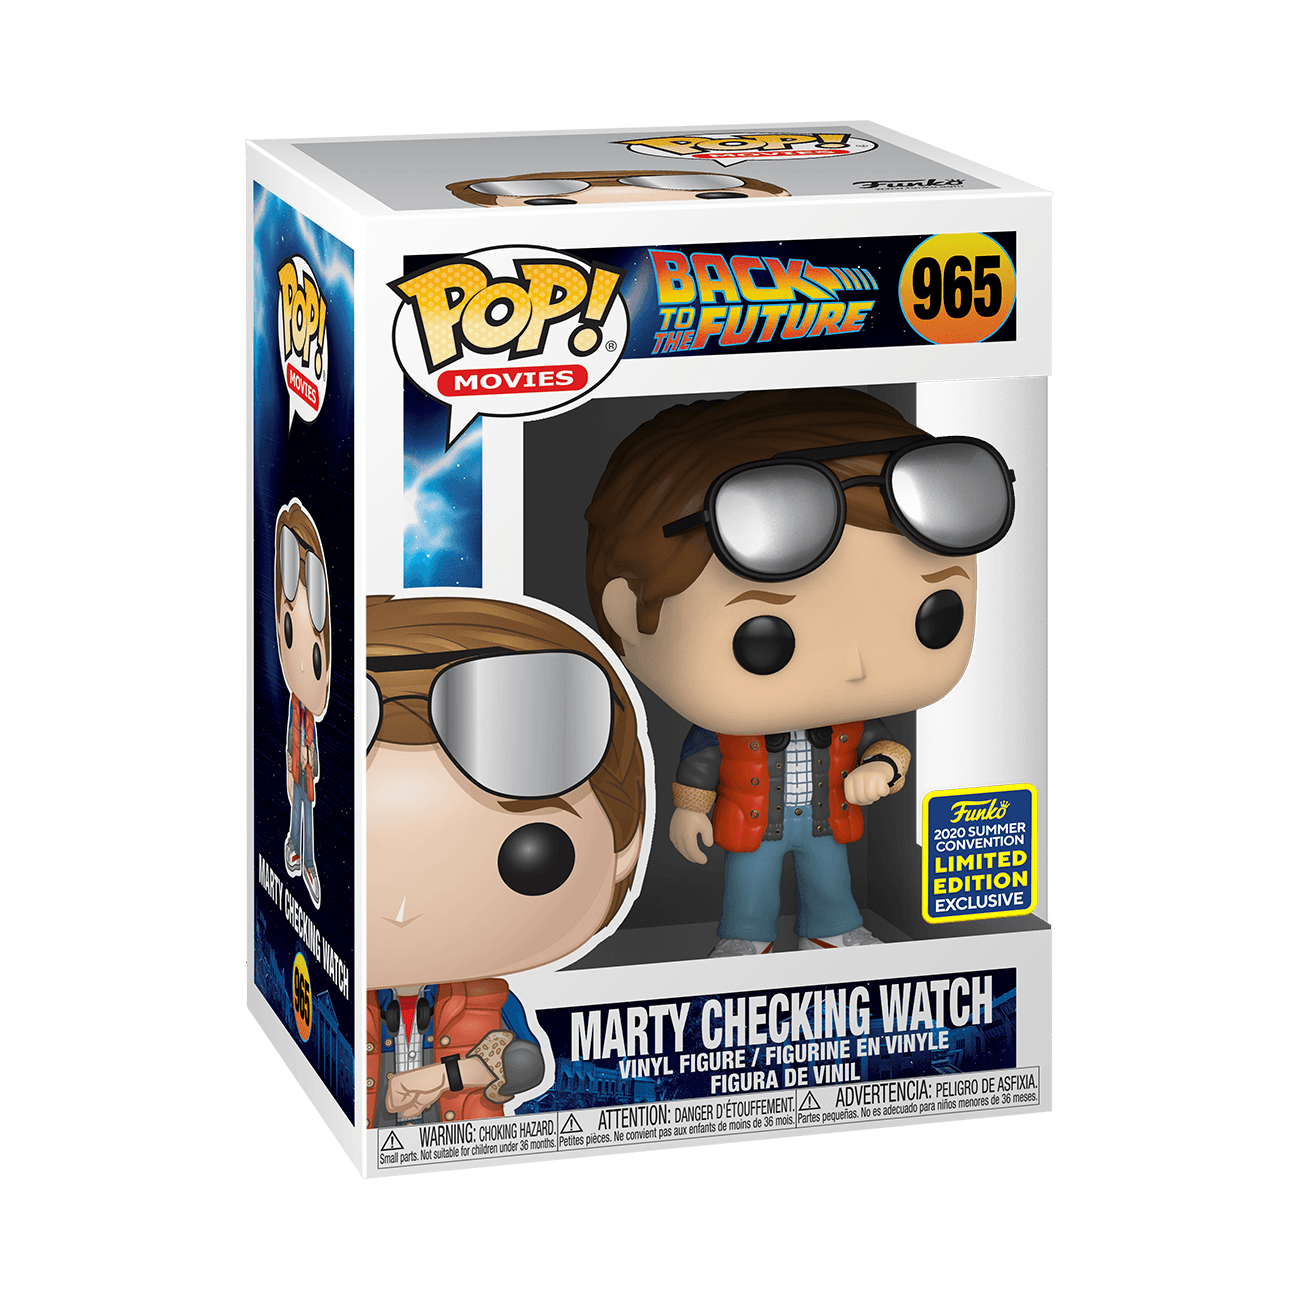 Pop! Movies - Back To The Future - #0965 Marty Checking Watch - 2020 Summer Convention LIMITED Edition EXCLUSIVE - Hobby Champion Inc